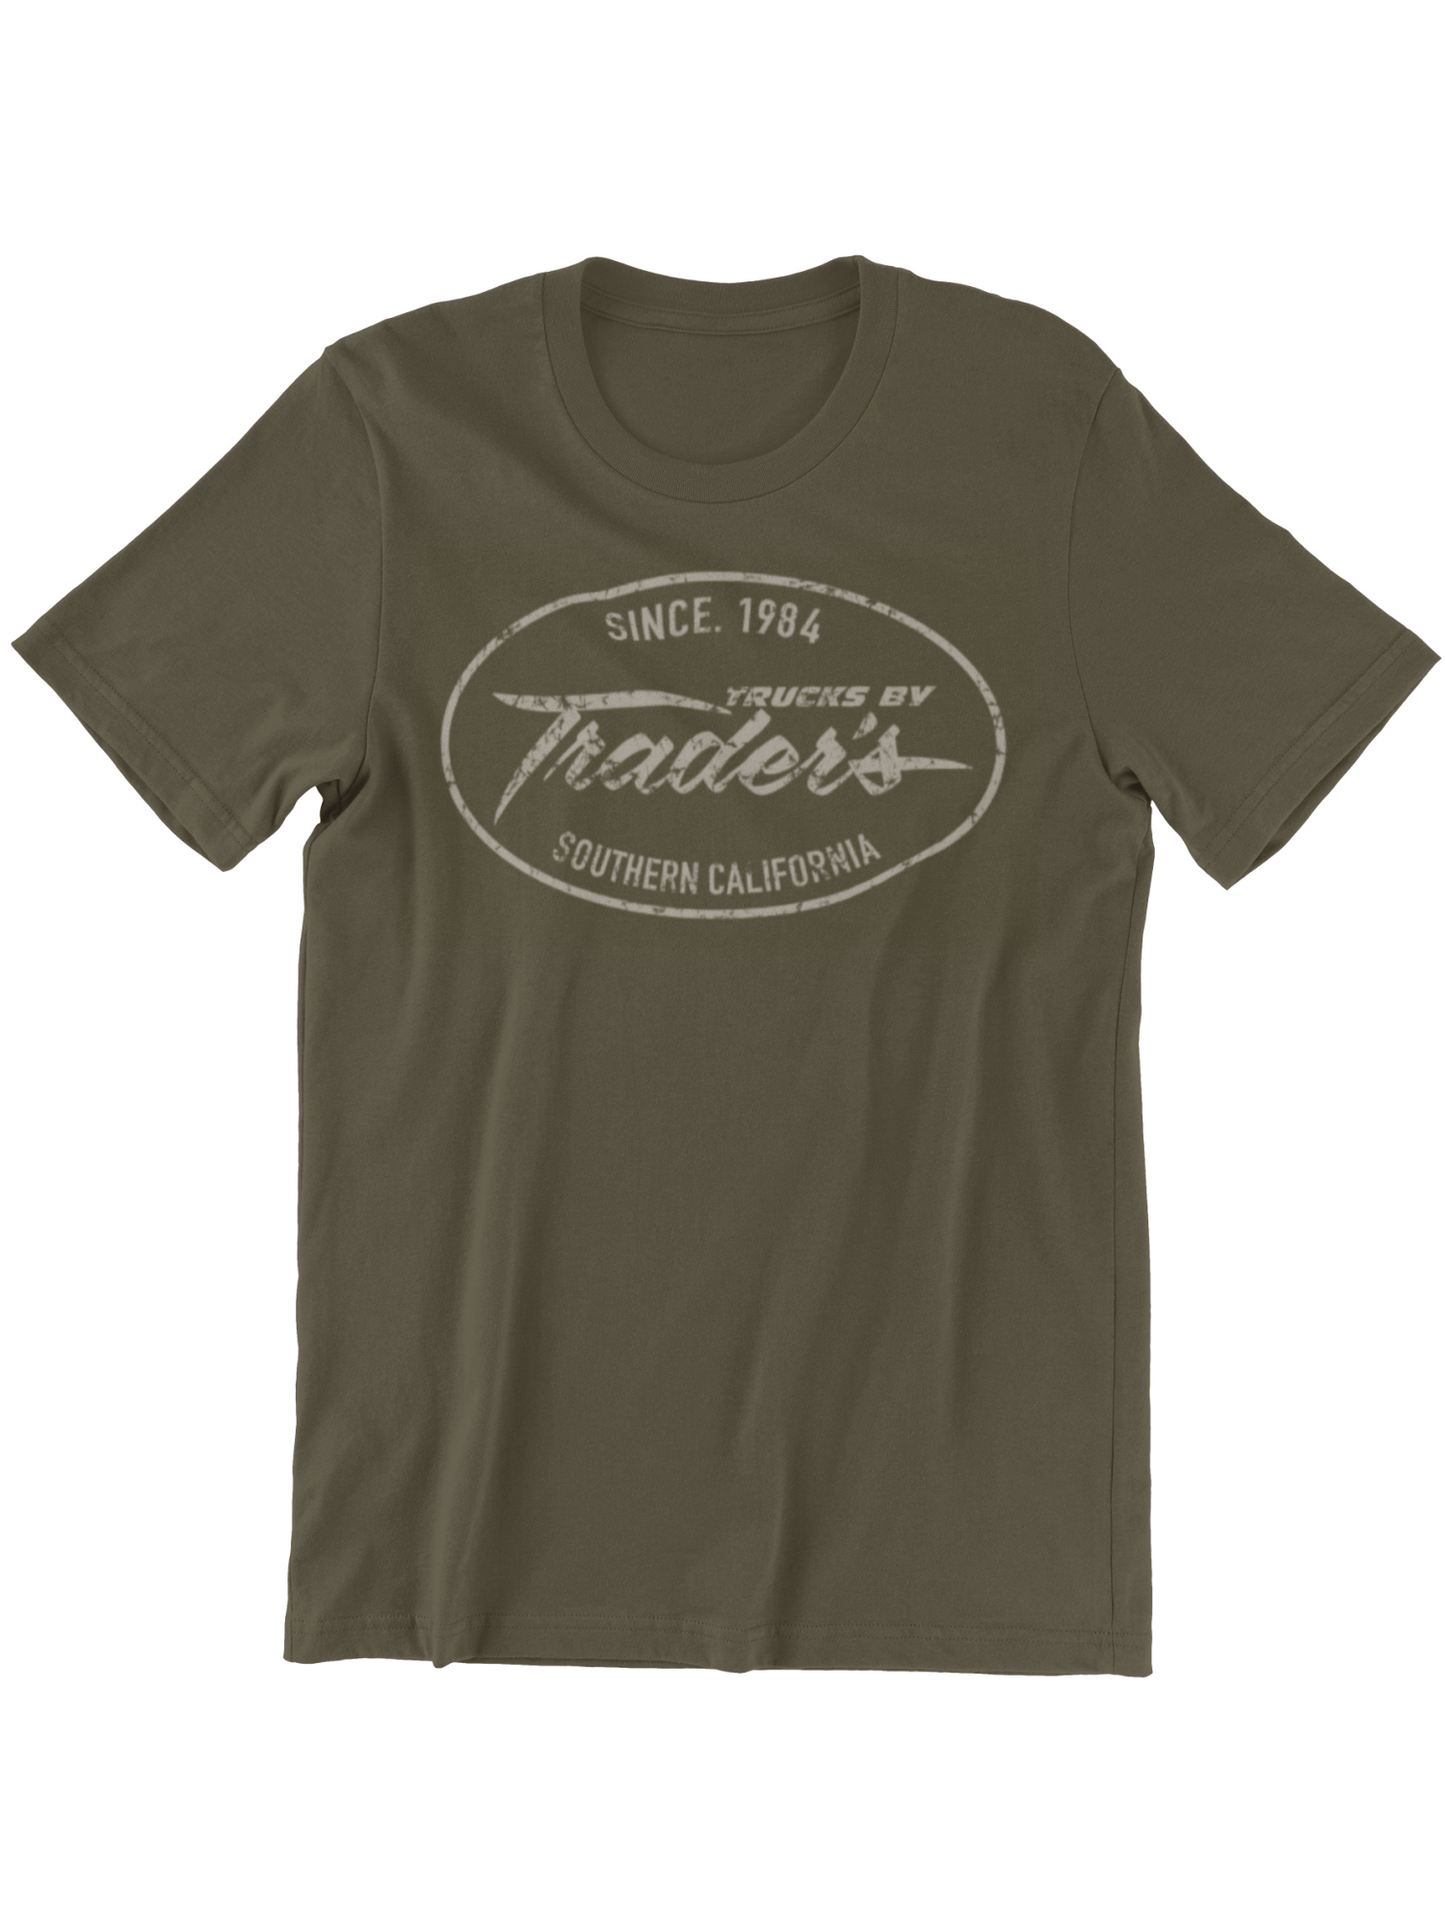 NEW! Limited Edition Tee - Distressed Trucks by Trader's 1984